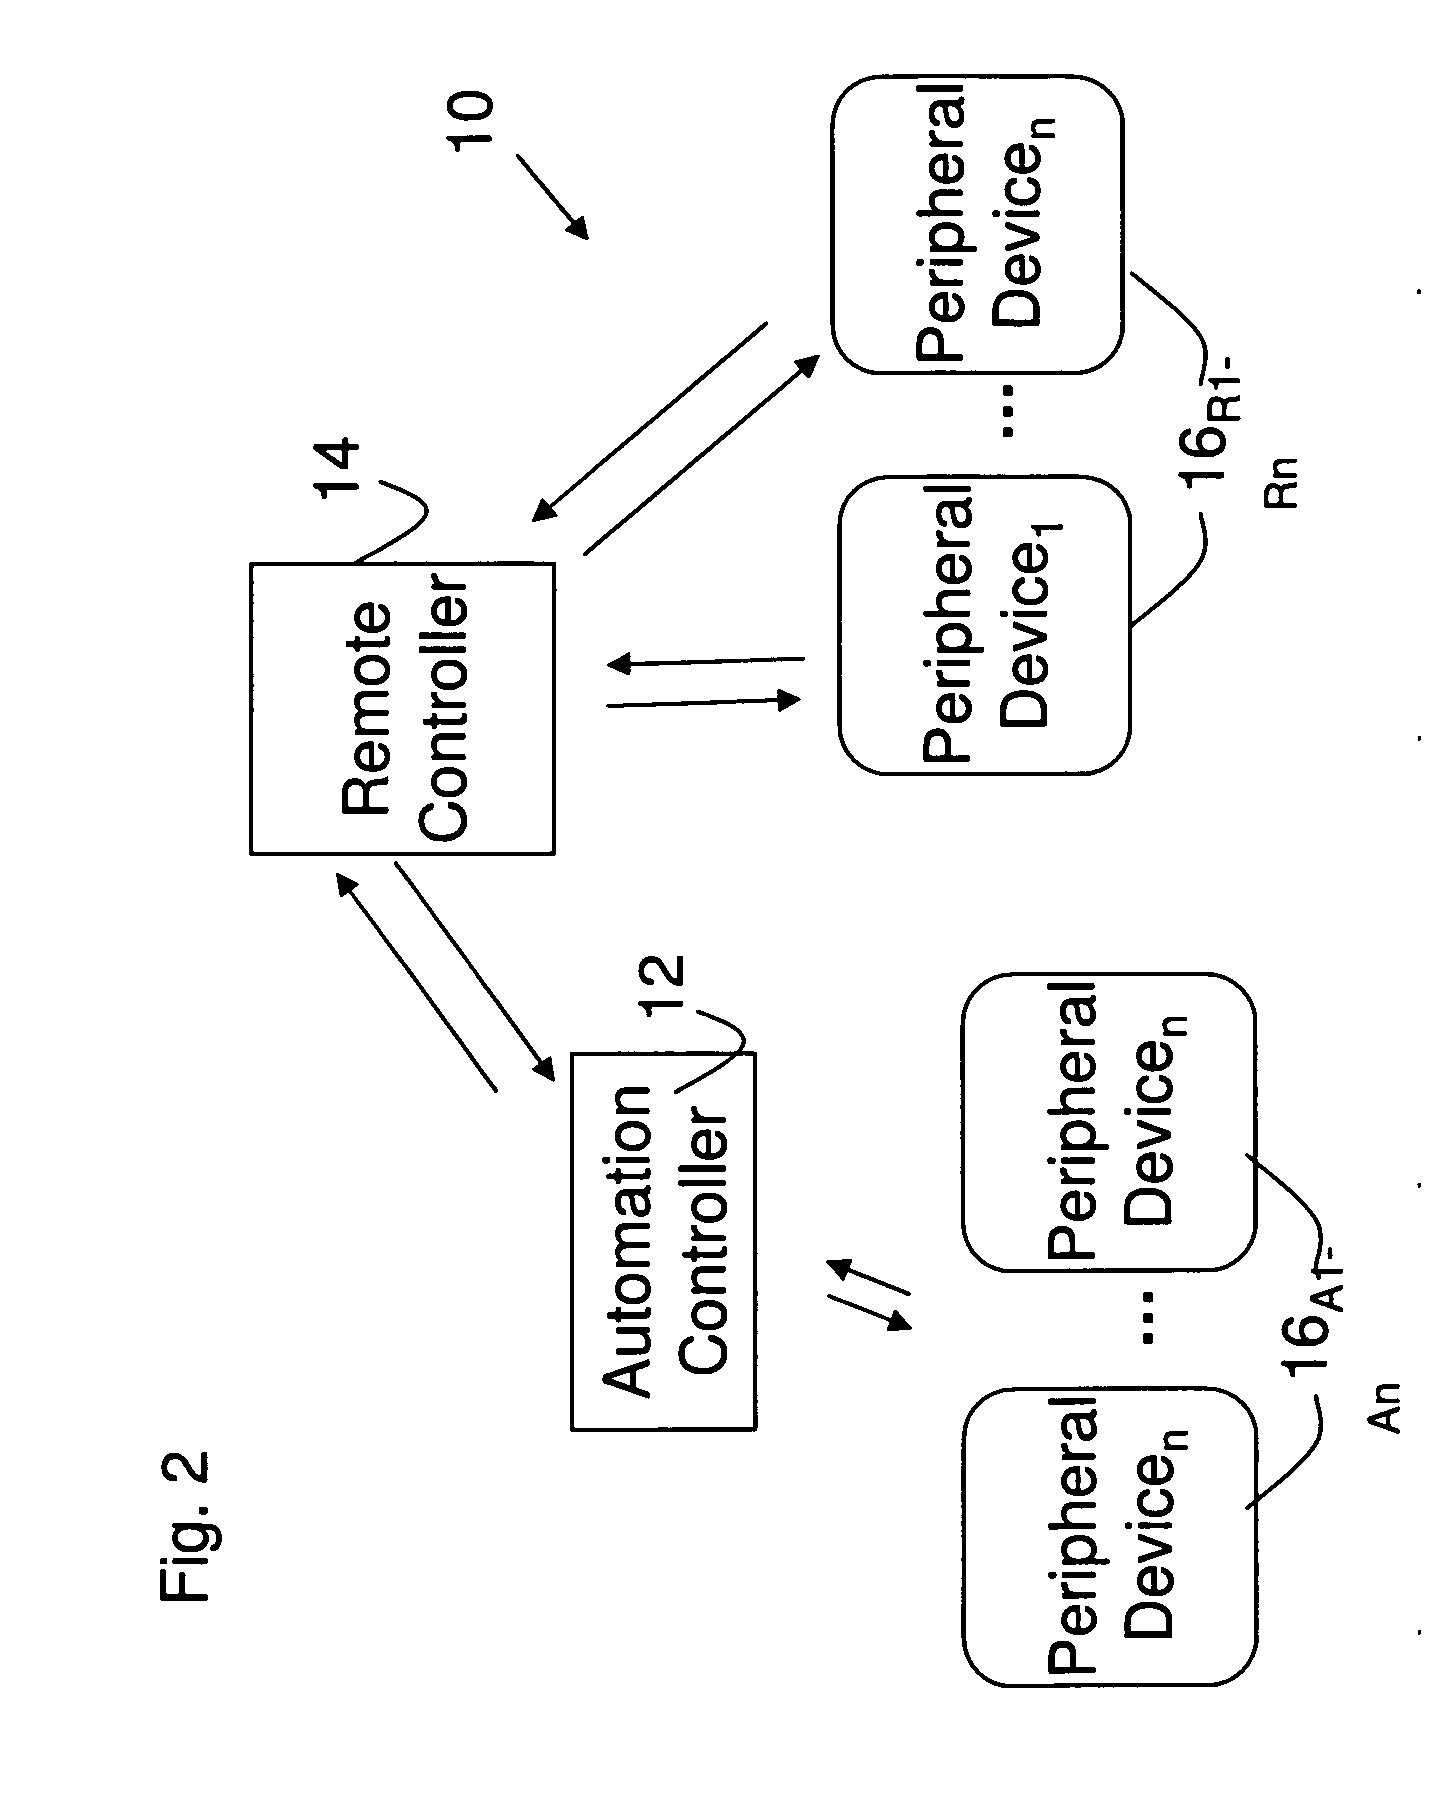 Upgradeable Automation Devices, Systems, Architectures, and Methods